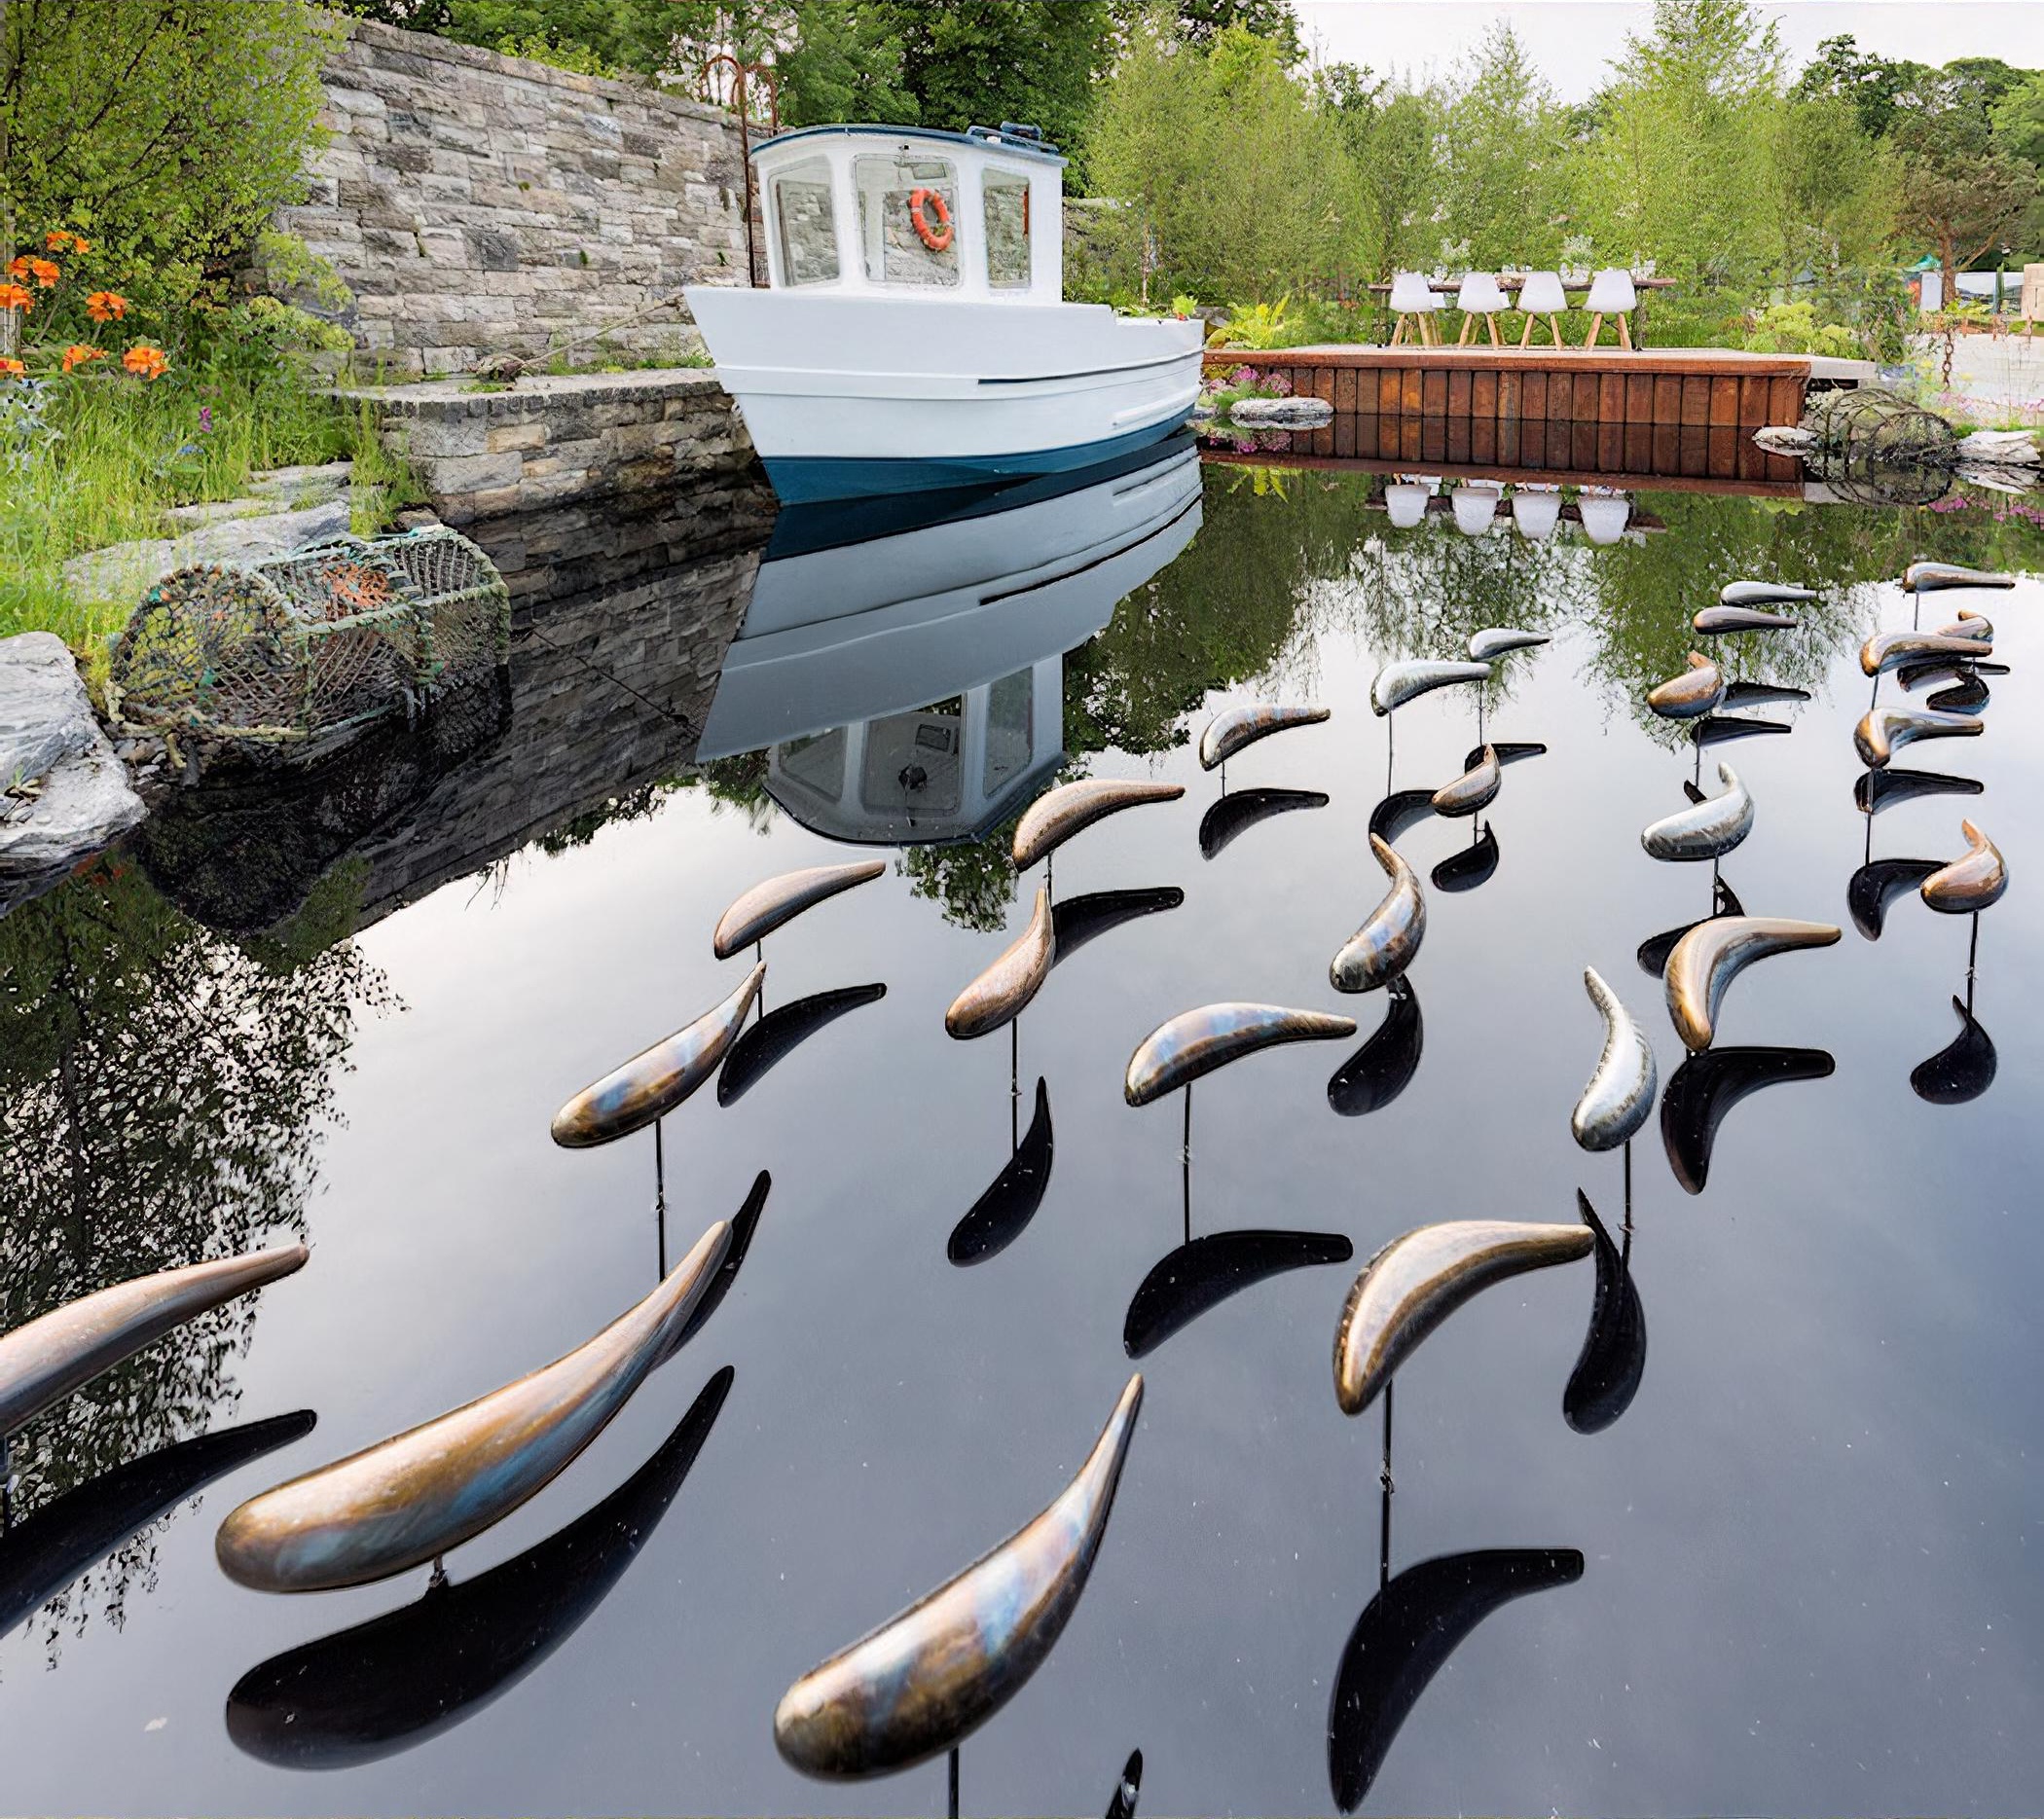 The Sustainable seafood garden by Ireland based garden designer Andrew Christopher Dunne